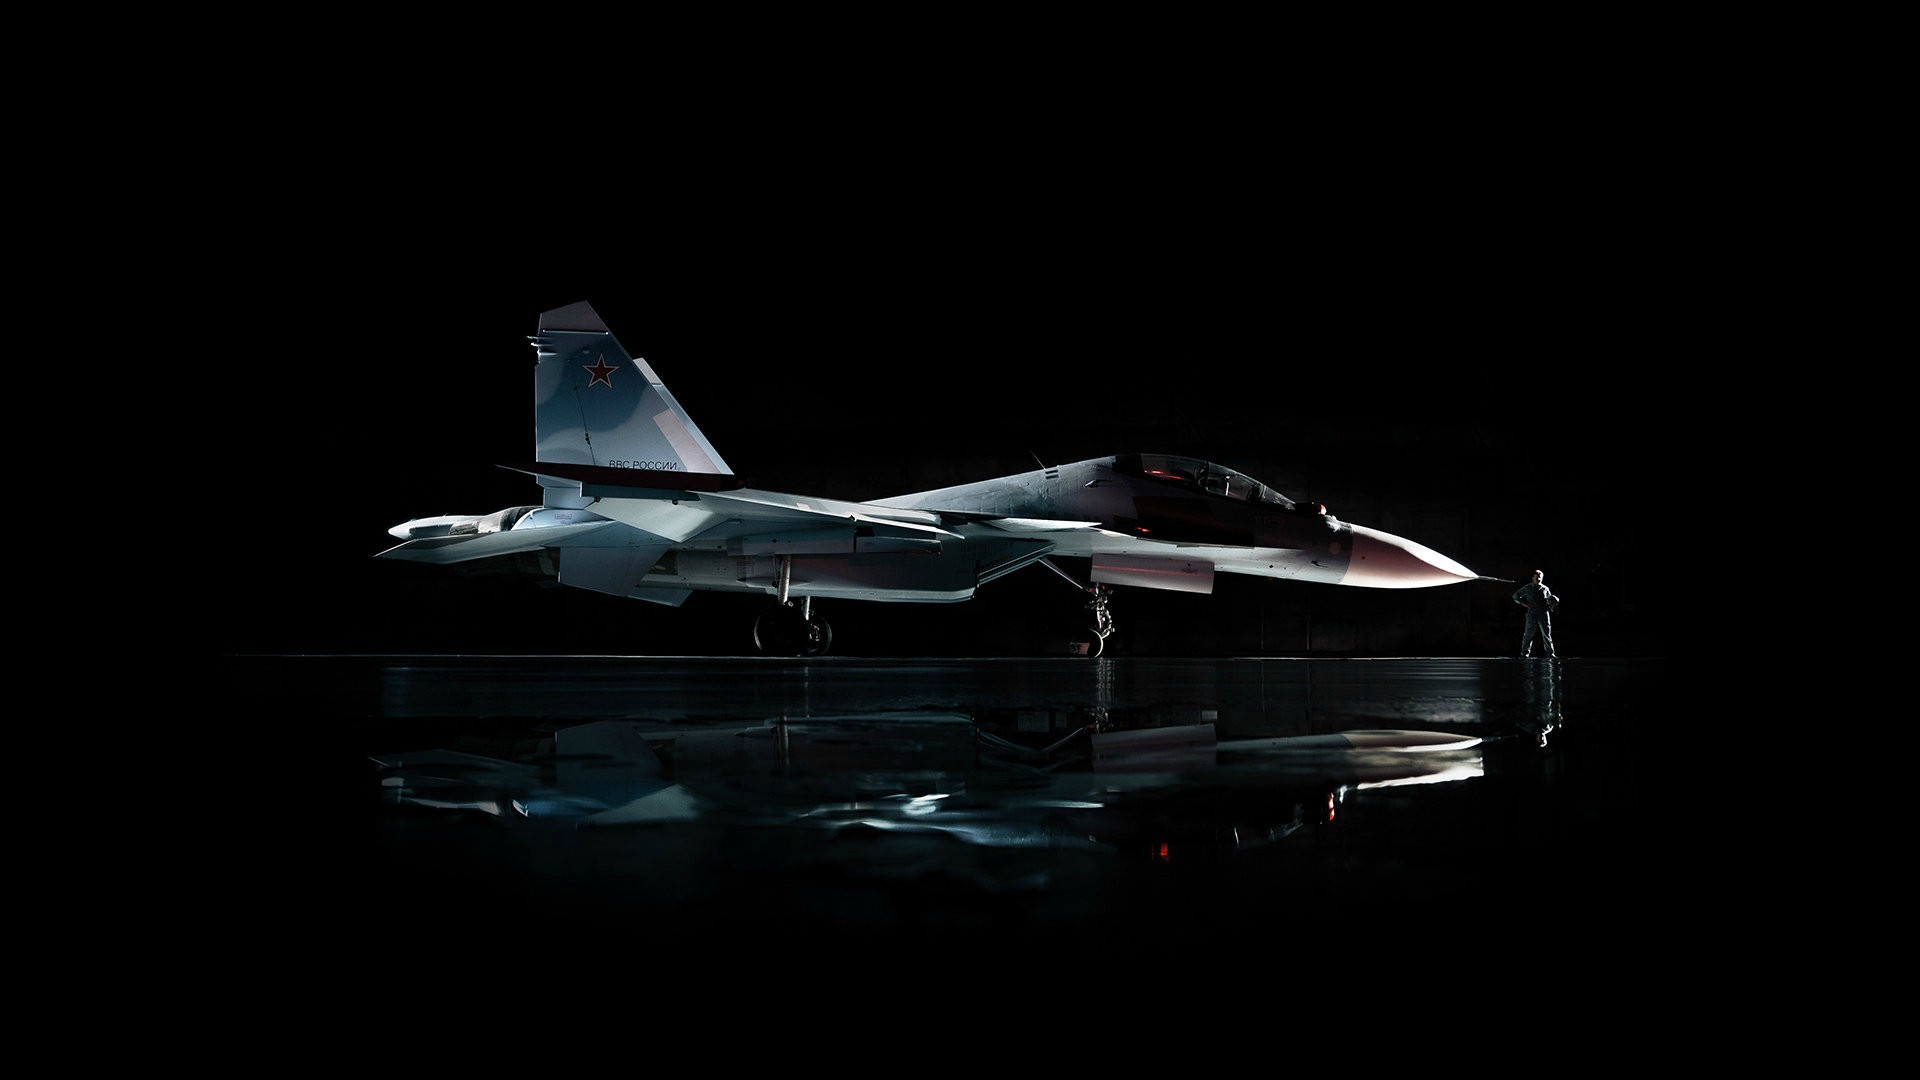 General 1920x1080 military military aircraft jet fighter Sukhoi Sukhoi Su-30 Russian Air Force aircraft vehicle reflection military vehicle black background dark background side view Russian/Soviet aircraft